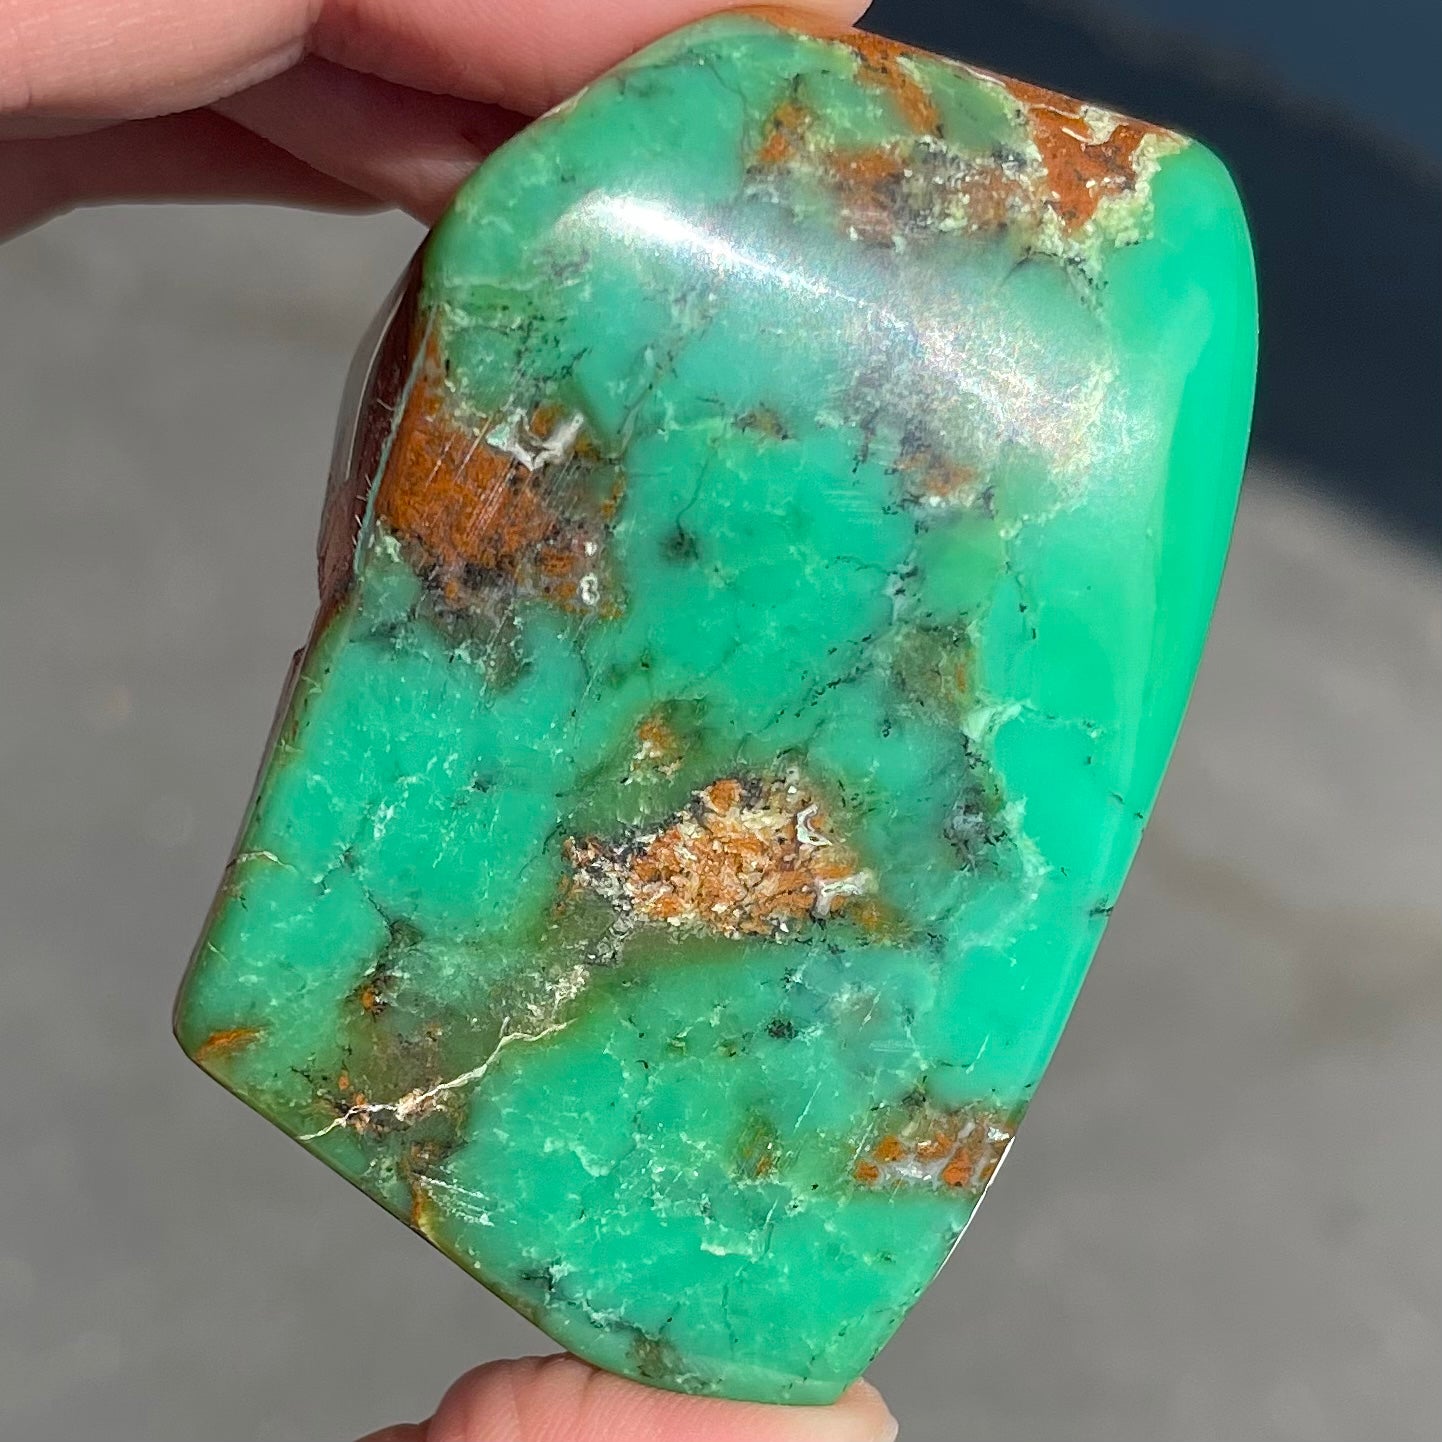 A polished green chrysoprase stone with brown matrix inclusions.